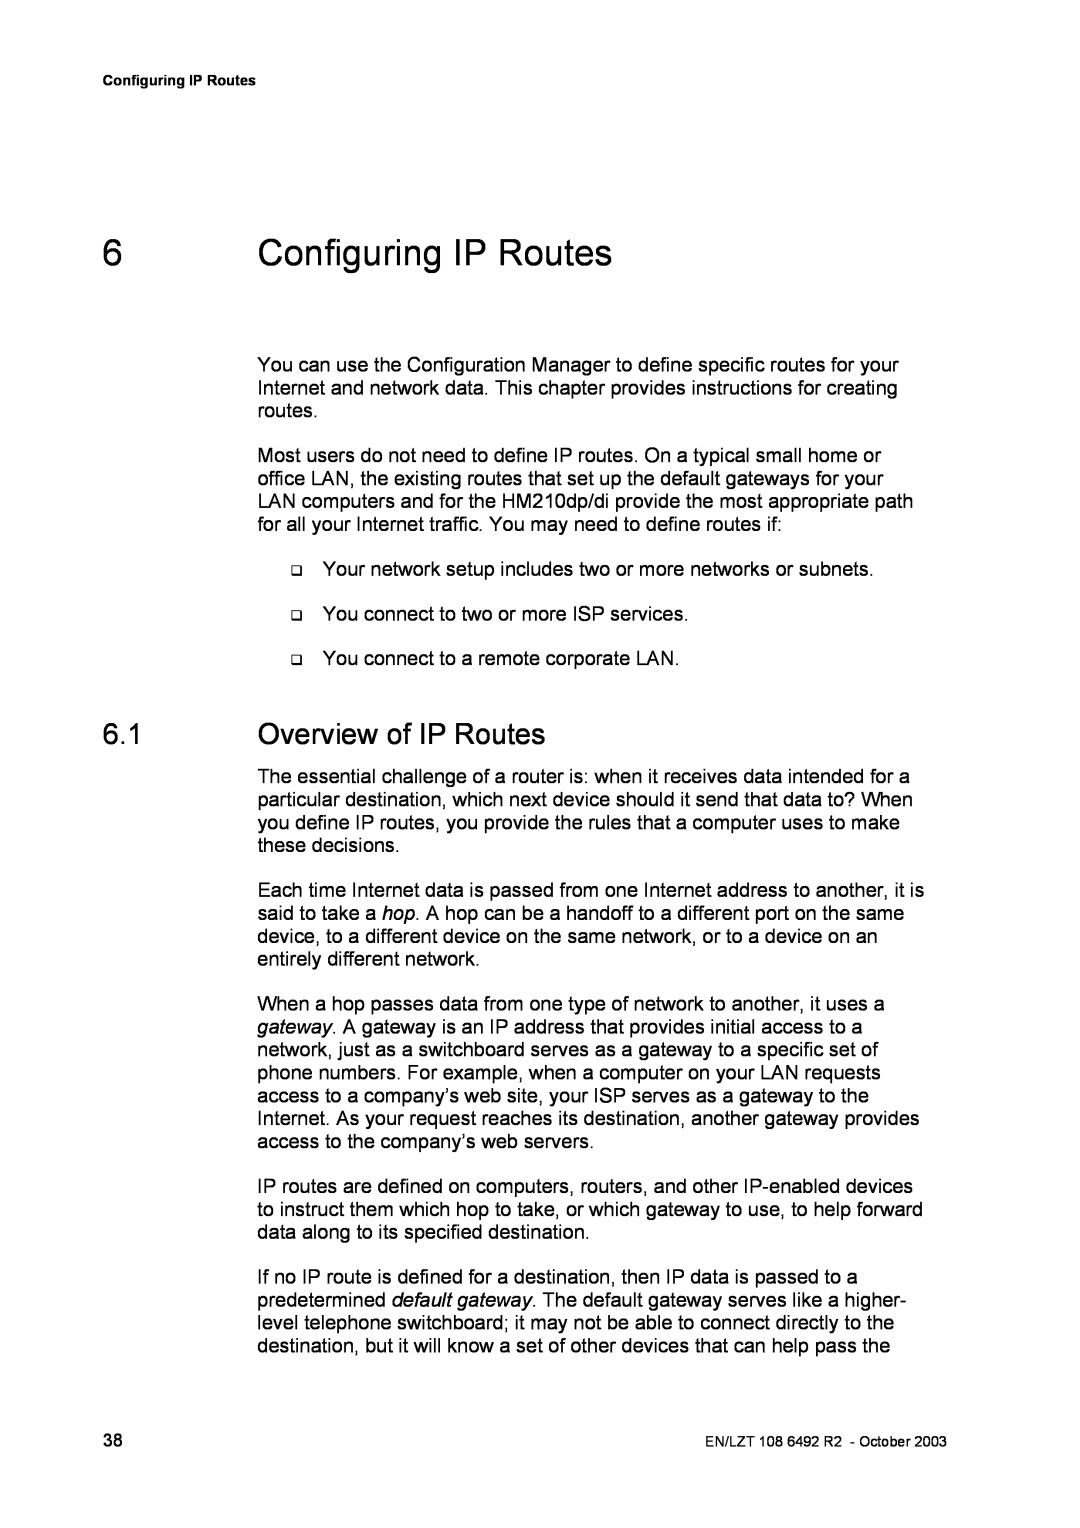 Garmin HM210DP/DI manual Configuring IP Routes, Overview of IP Routes 